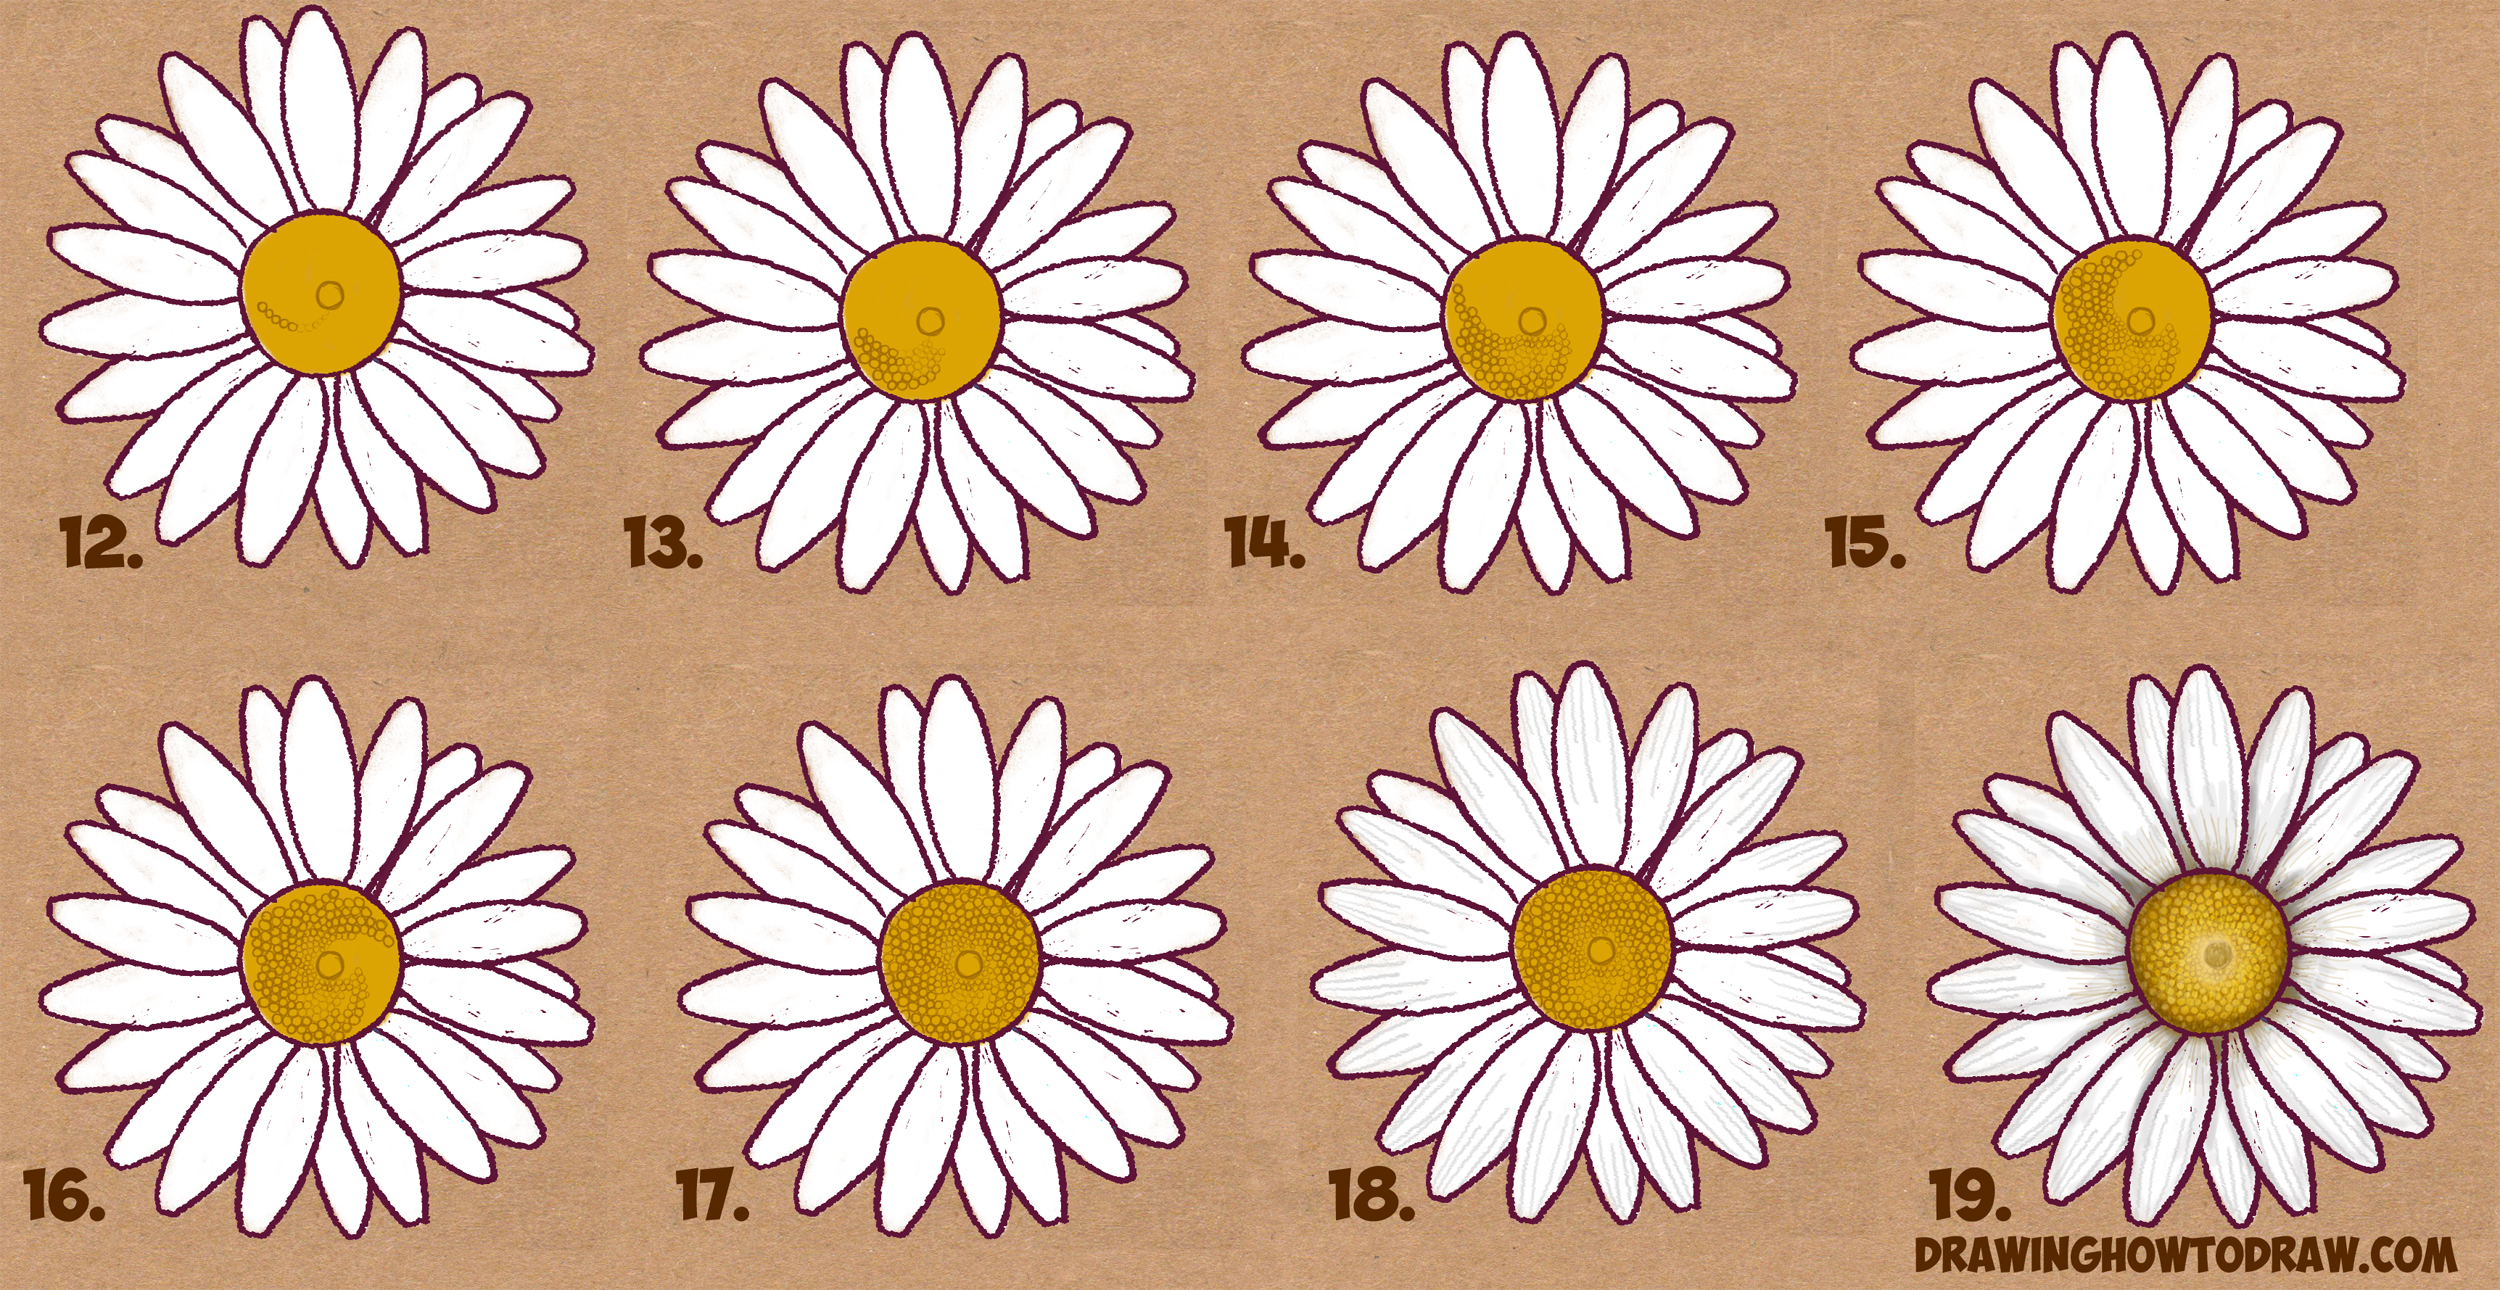 How to Draw a Daisy Flower (Daisies) in Easy Step by Step Drawing